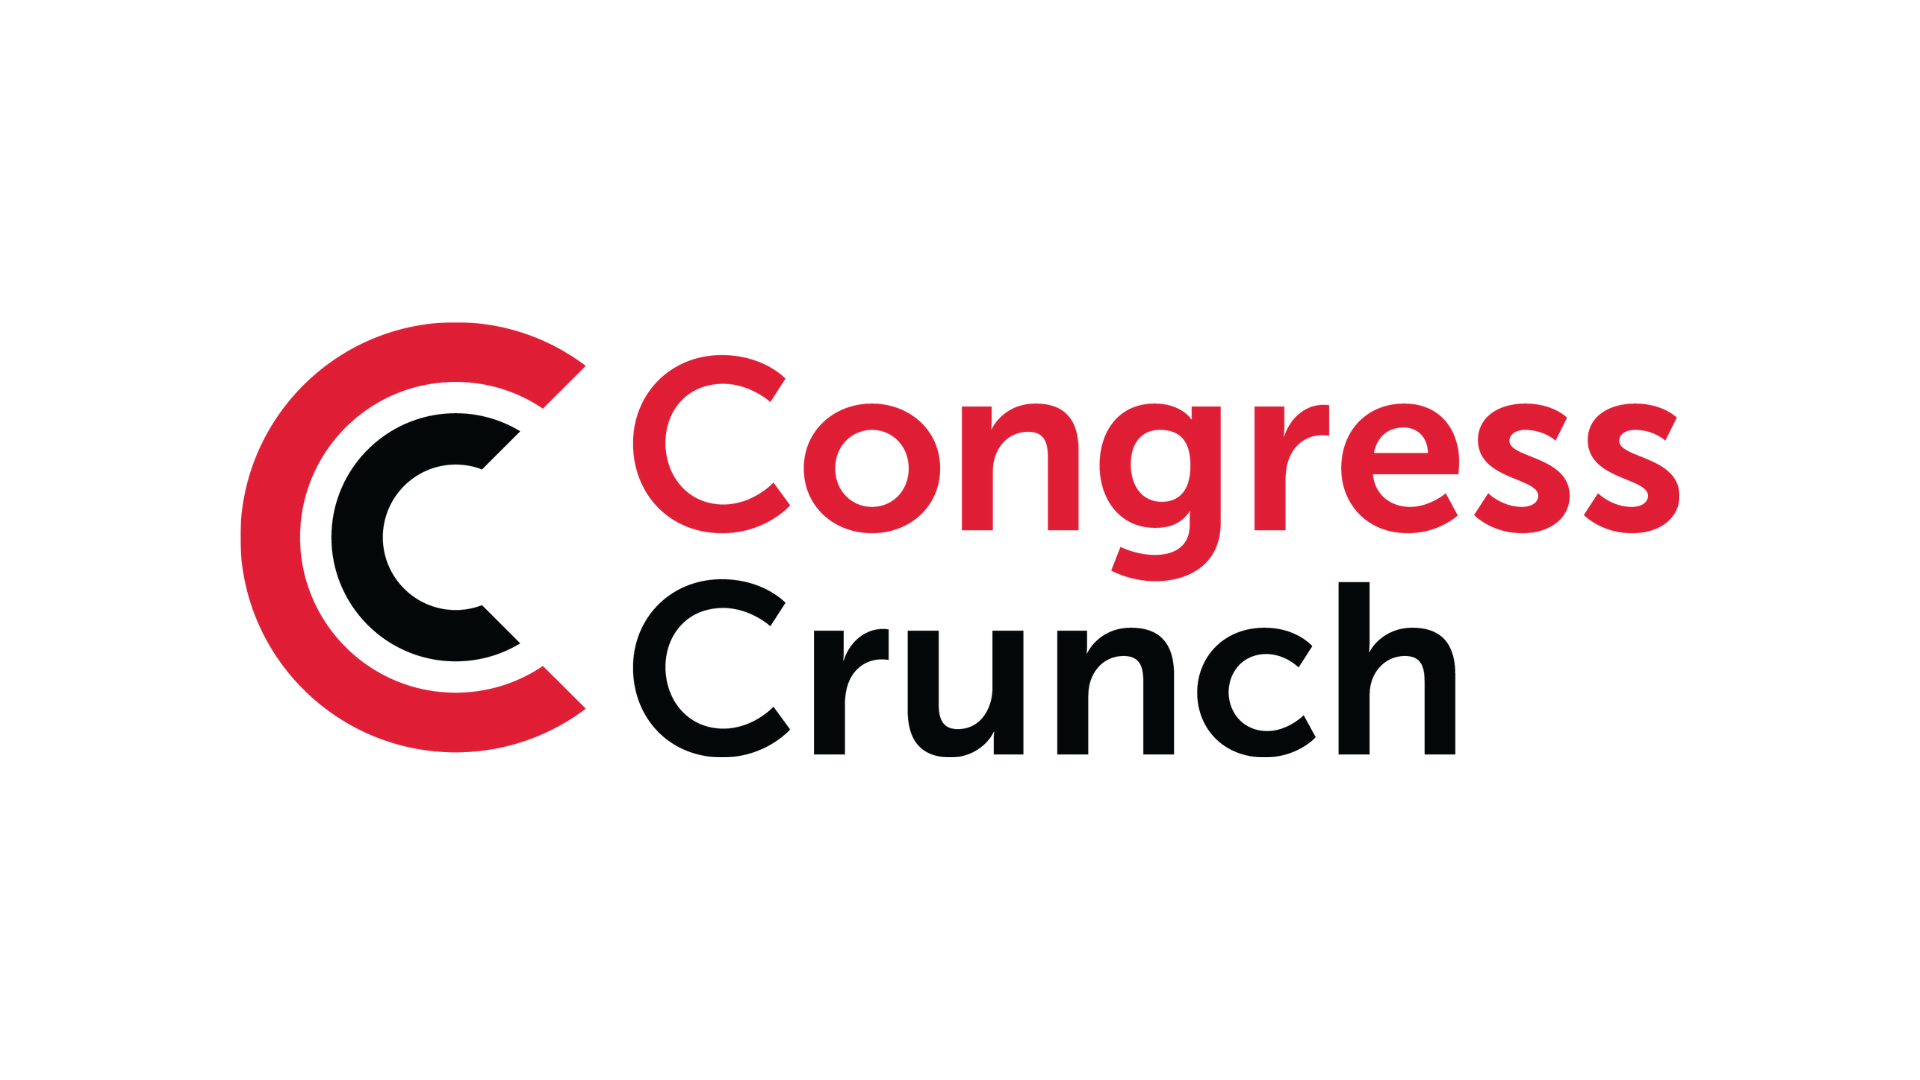 CCgroup’s Congress Crunch: Your essential guide to Mobile World Congress 2018